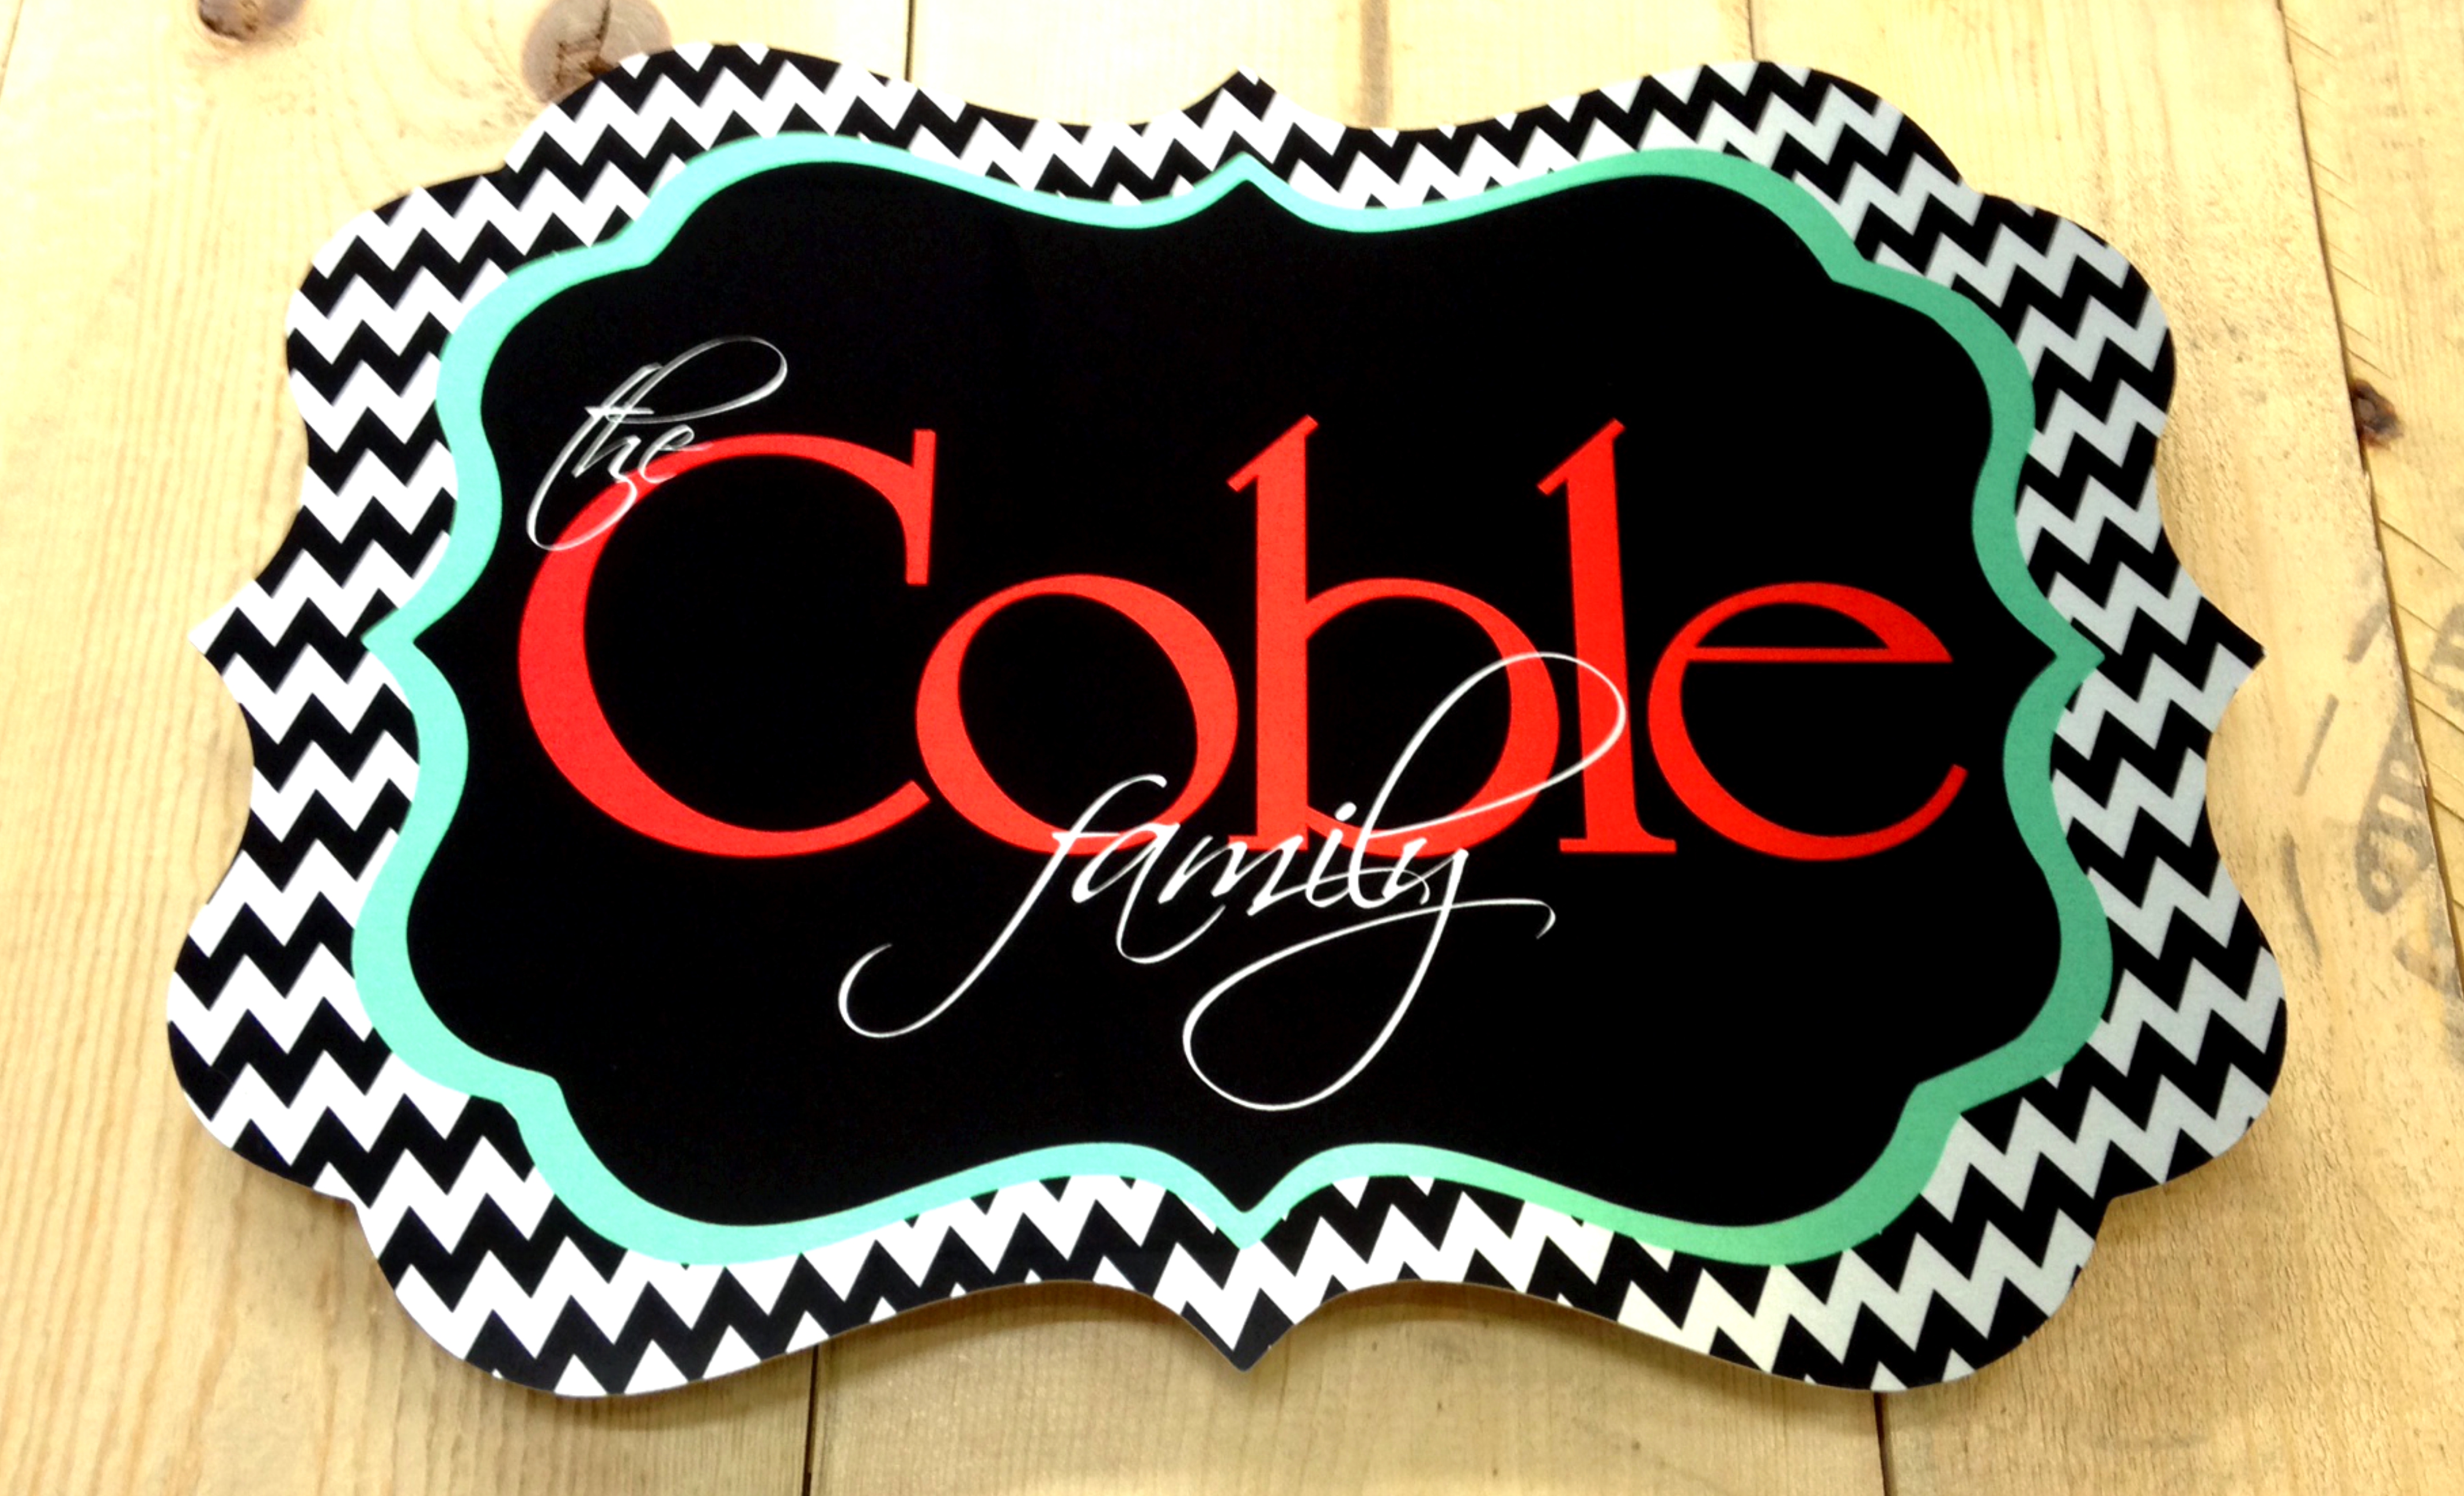 The Coble Family made with sublimation printing